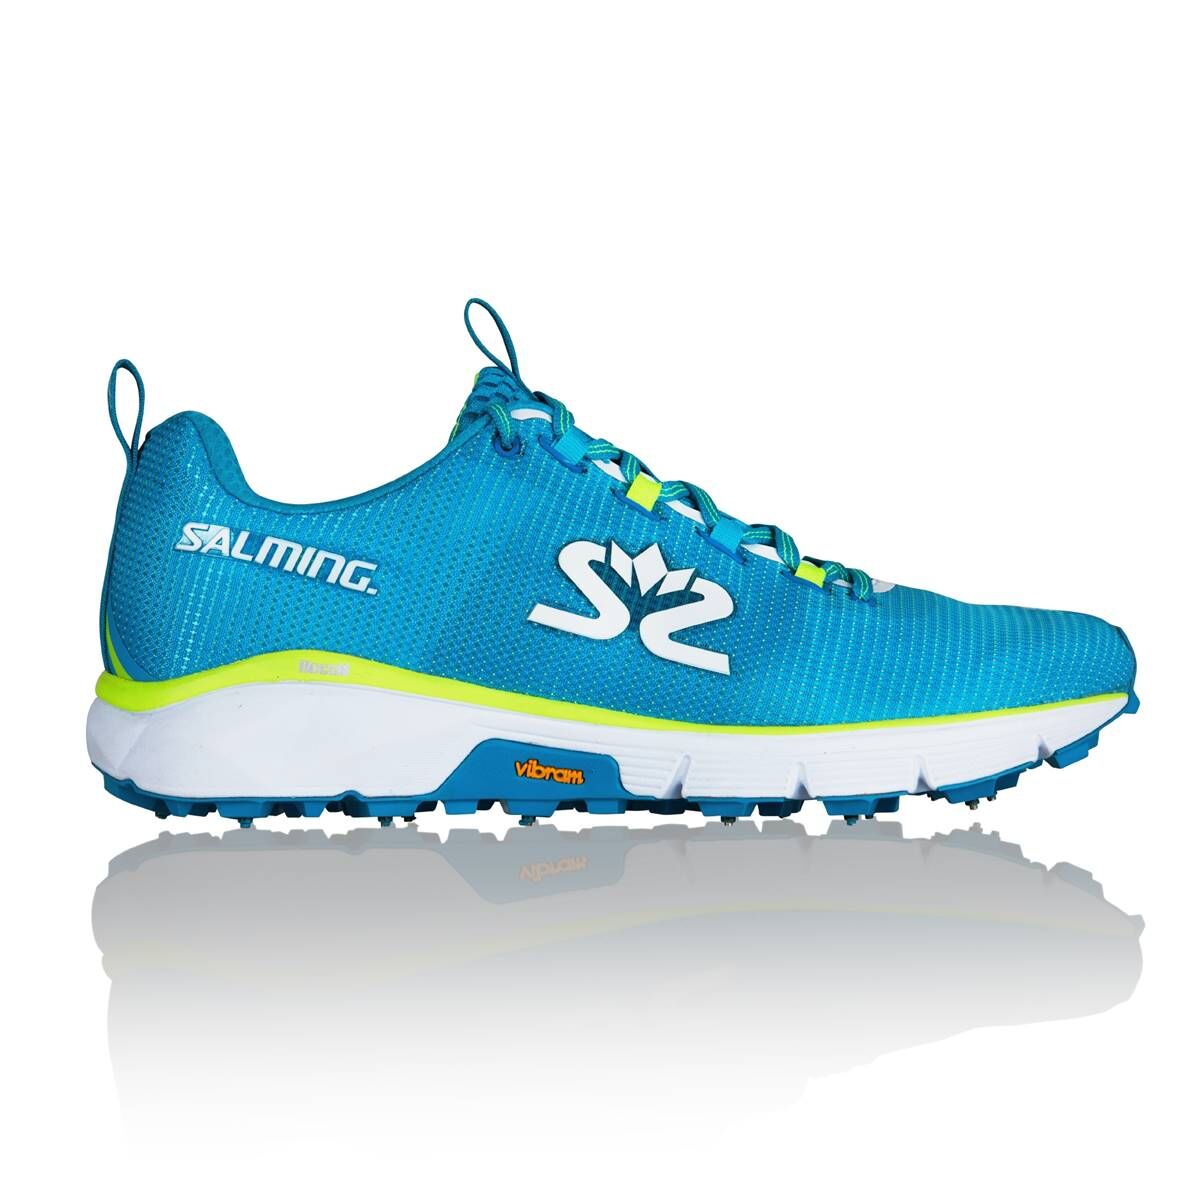 Salming Ispike - Zapatillas trail running - Hombre